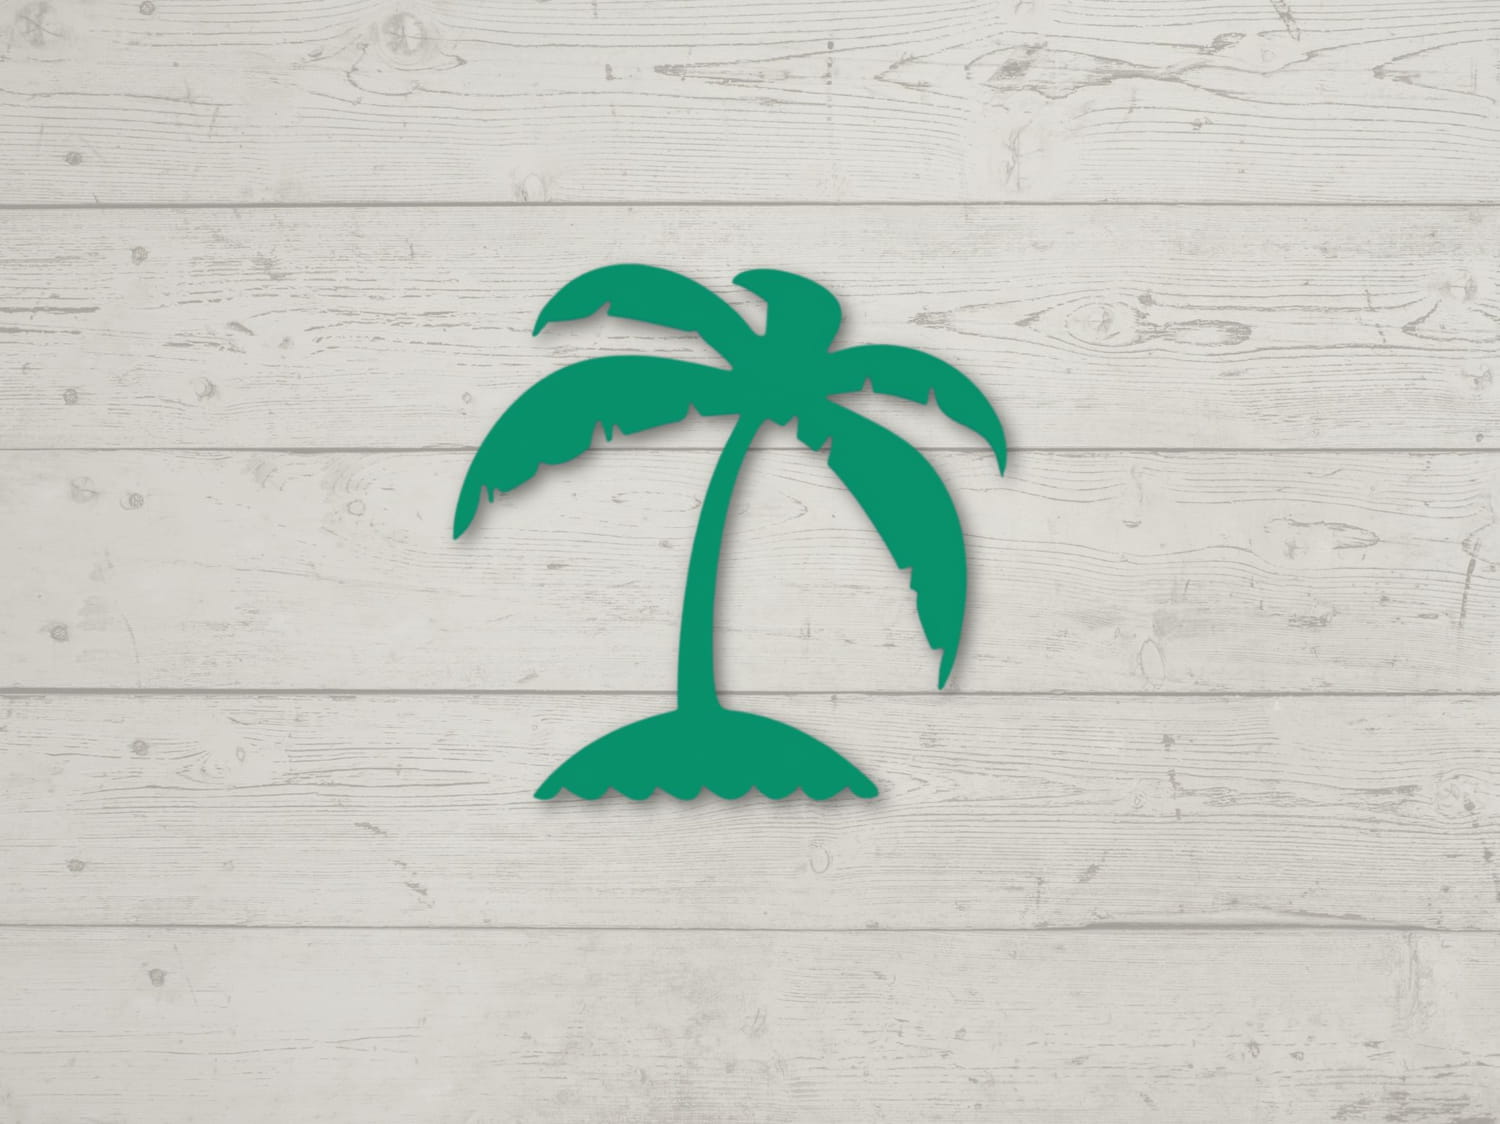 Palm Tree Silhouette Vector Art, Icons, and Graphics for Free Download